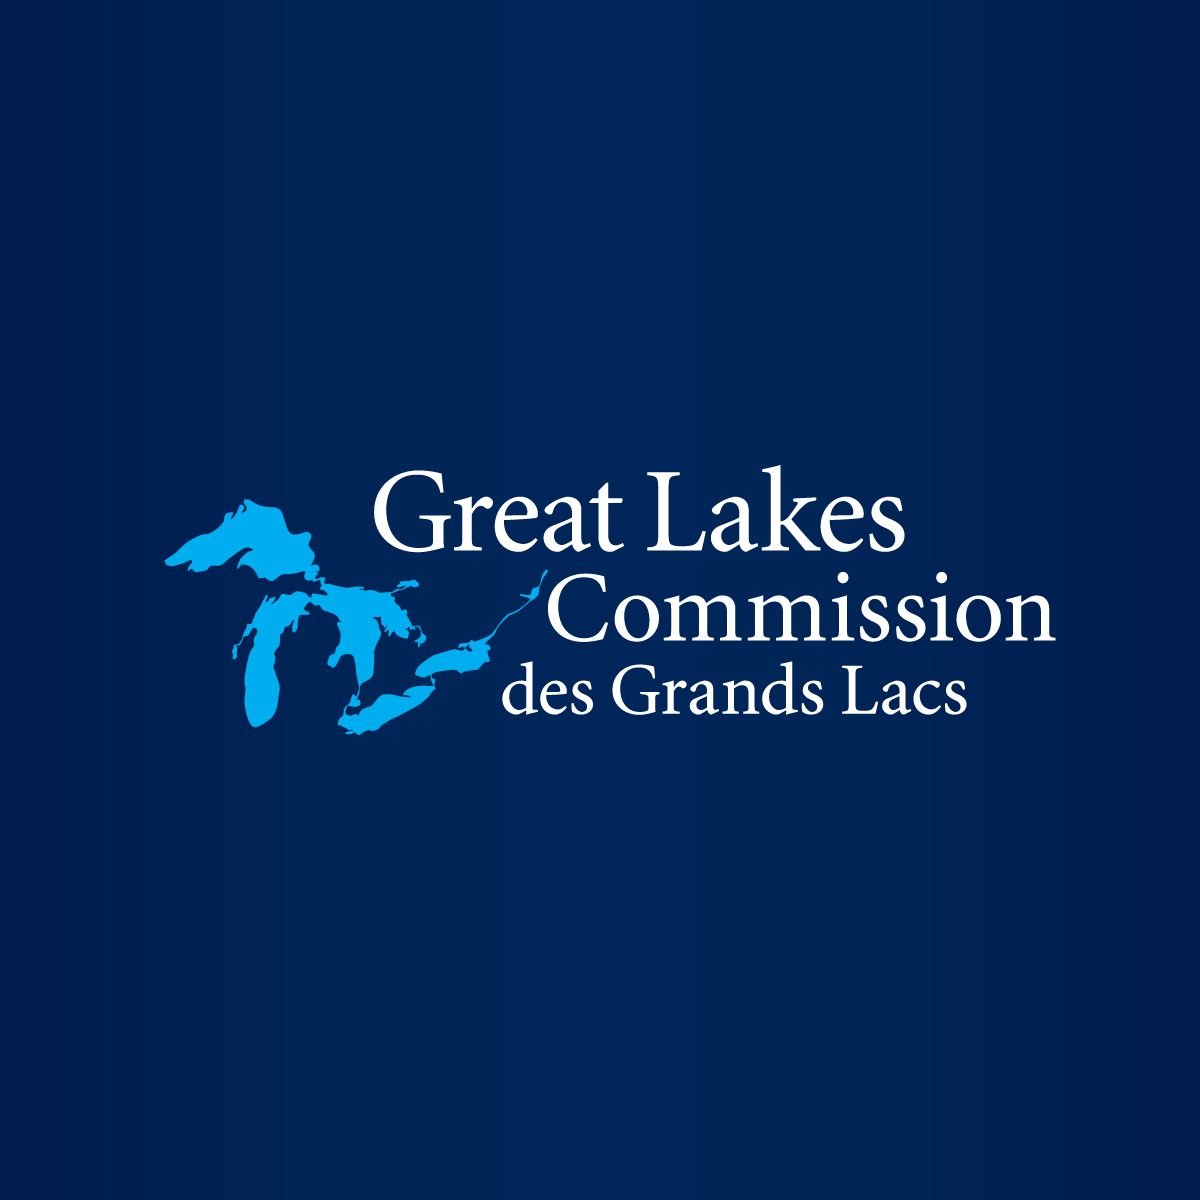 COMMENTARY: Great Lakes need more protections